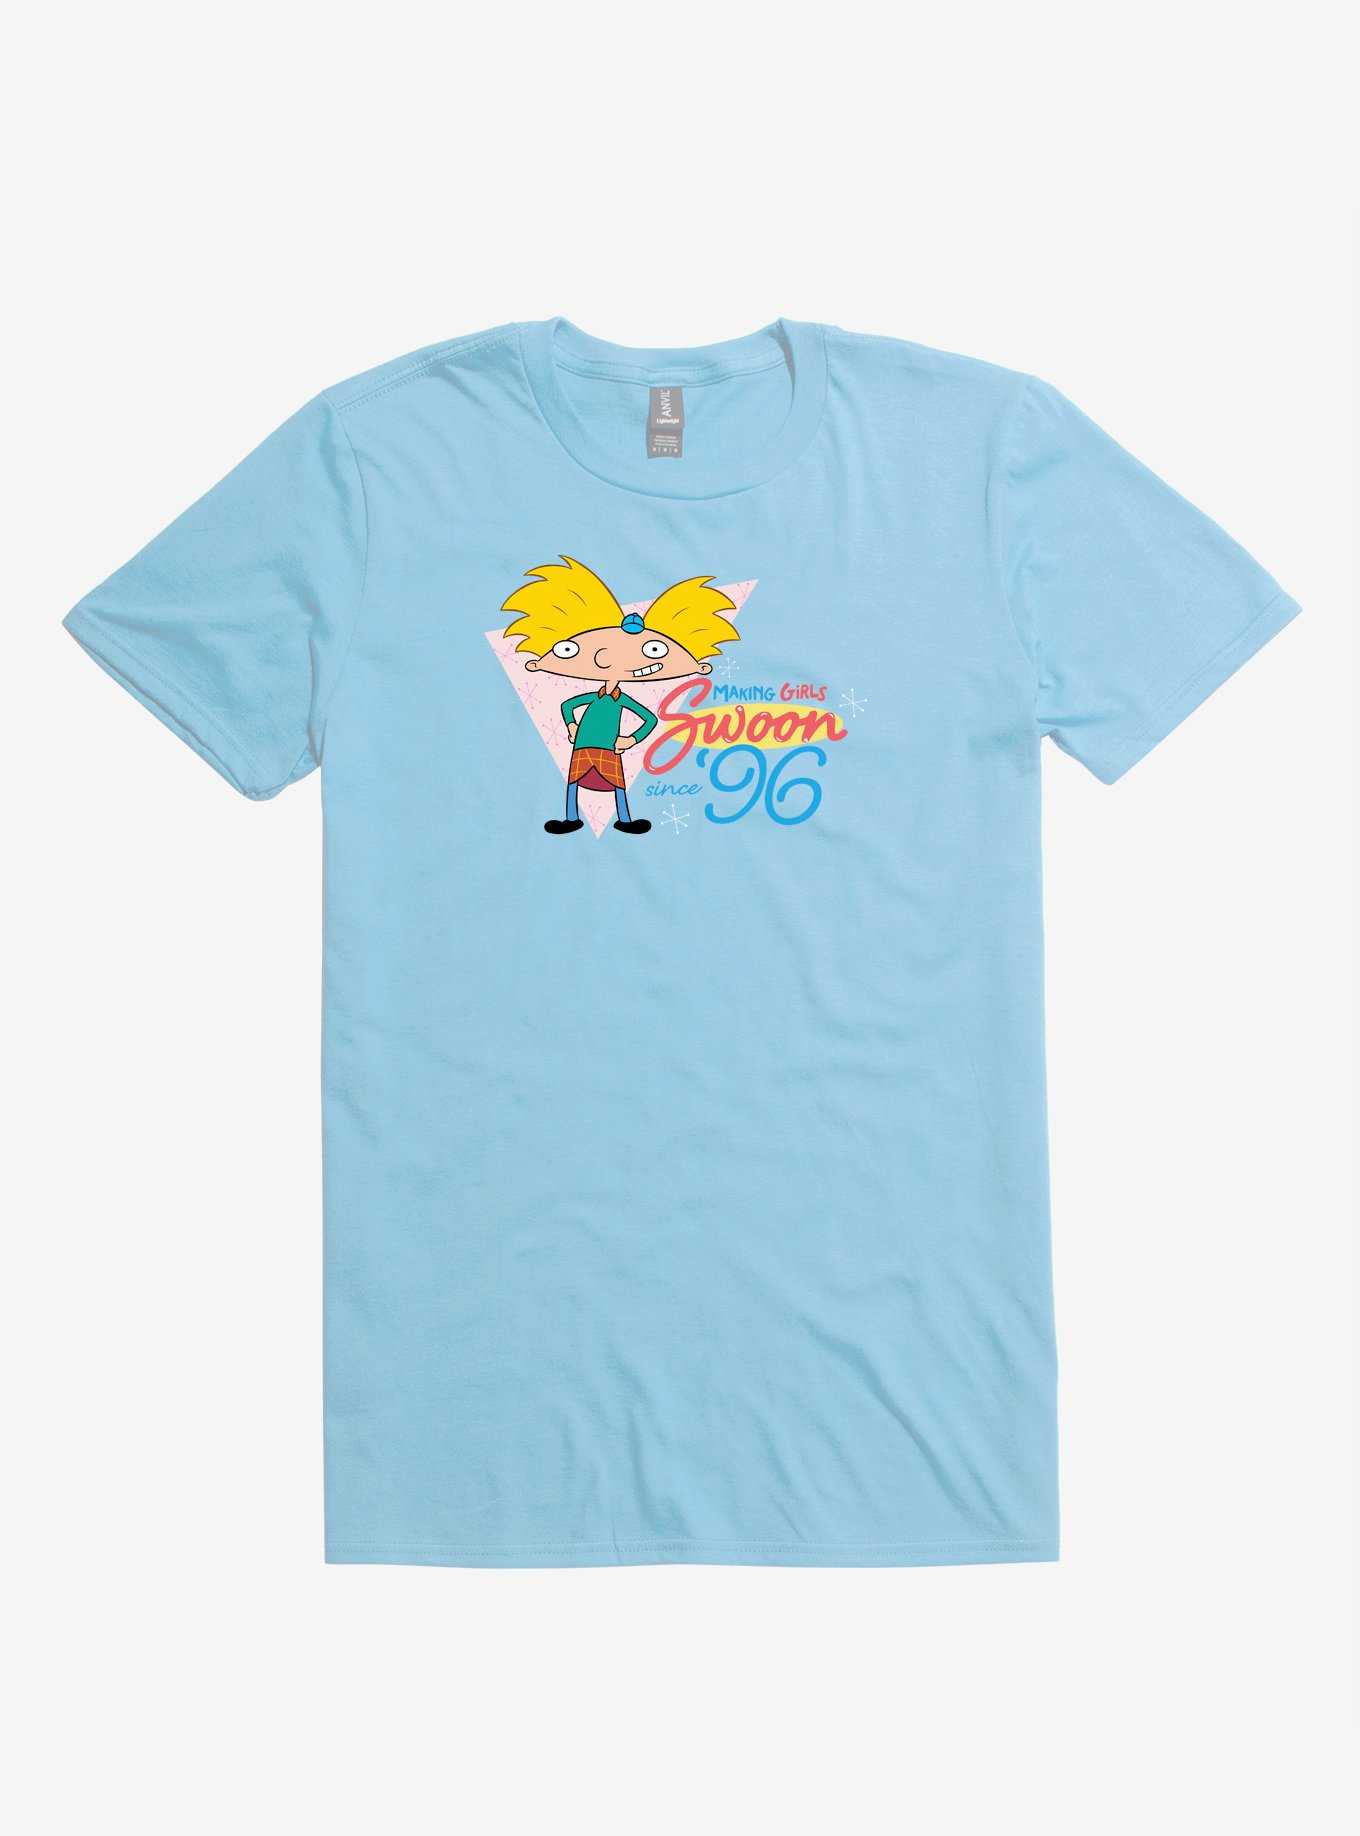 Hey Arnold! Swoon T-Shirt, , hi-res